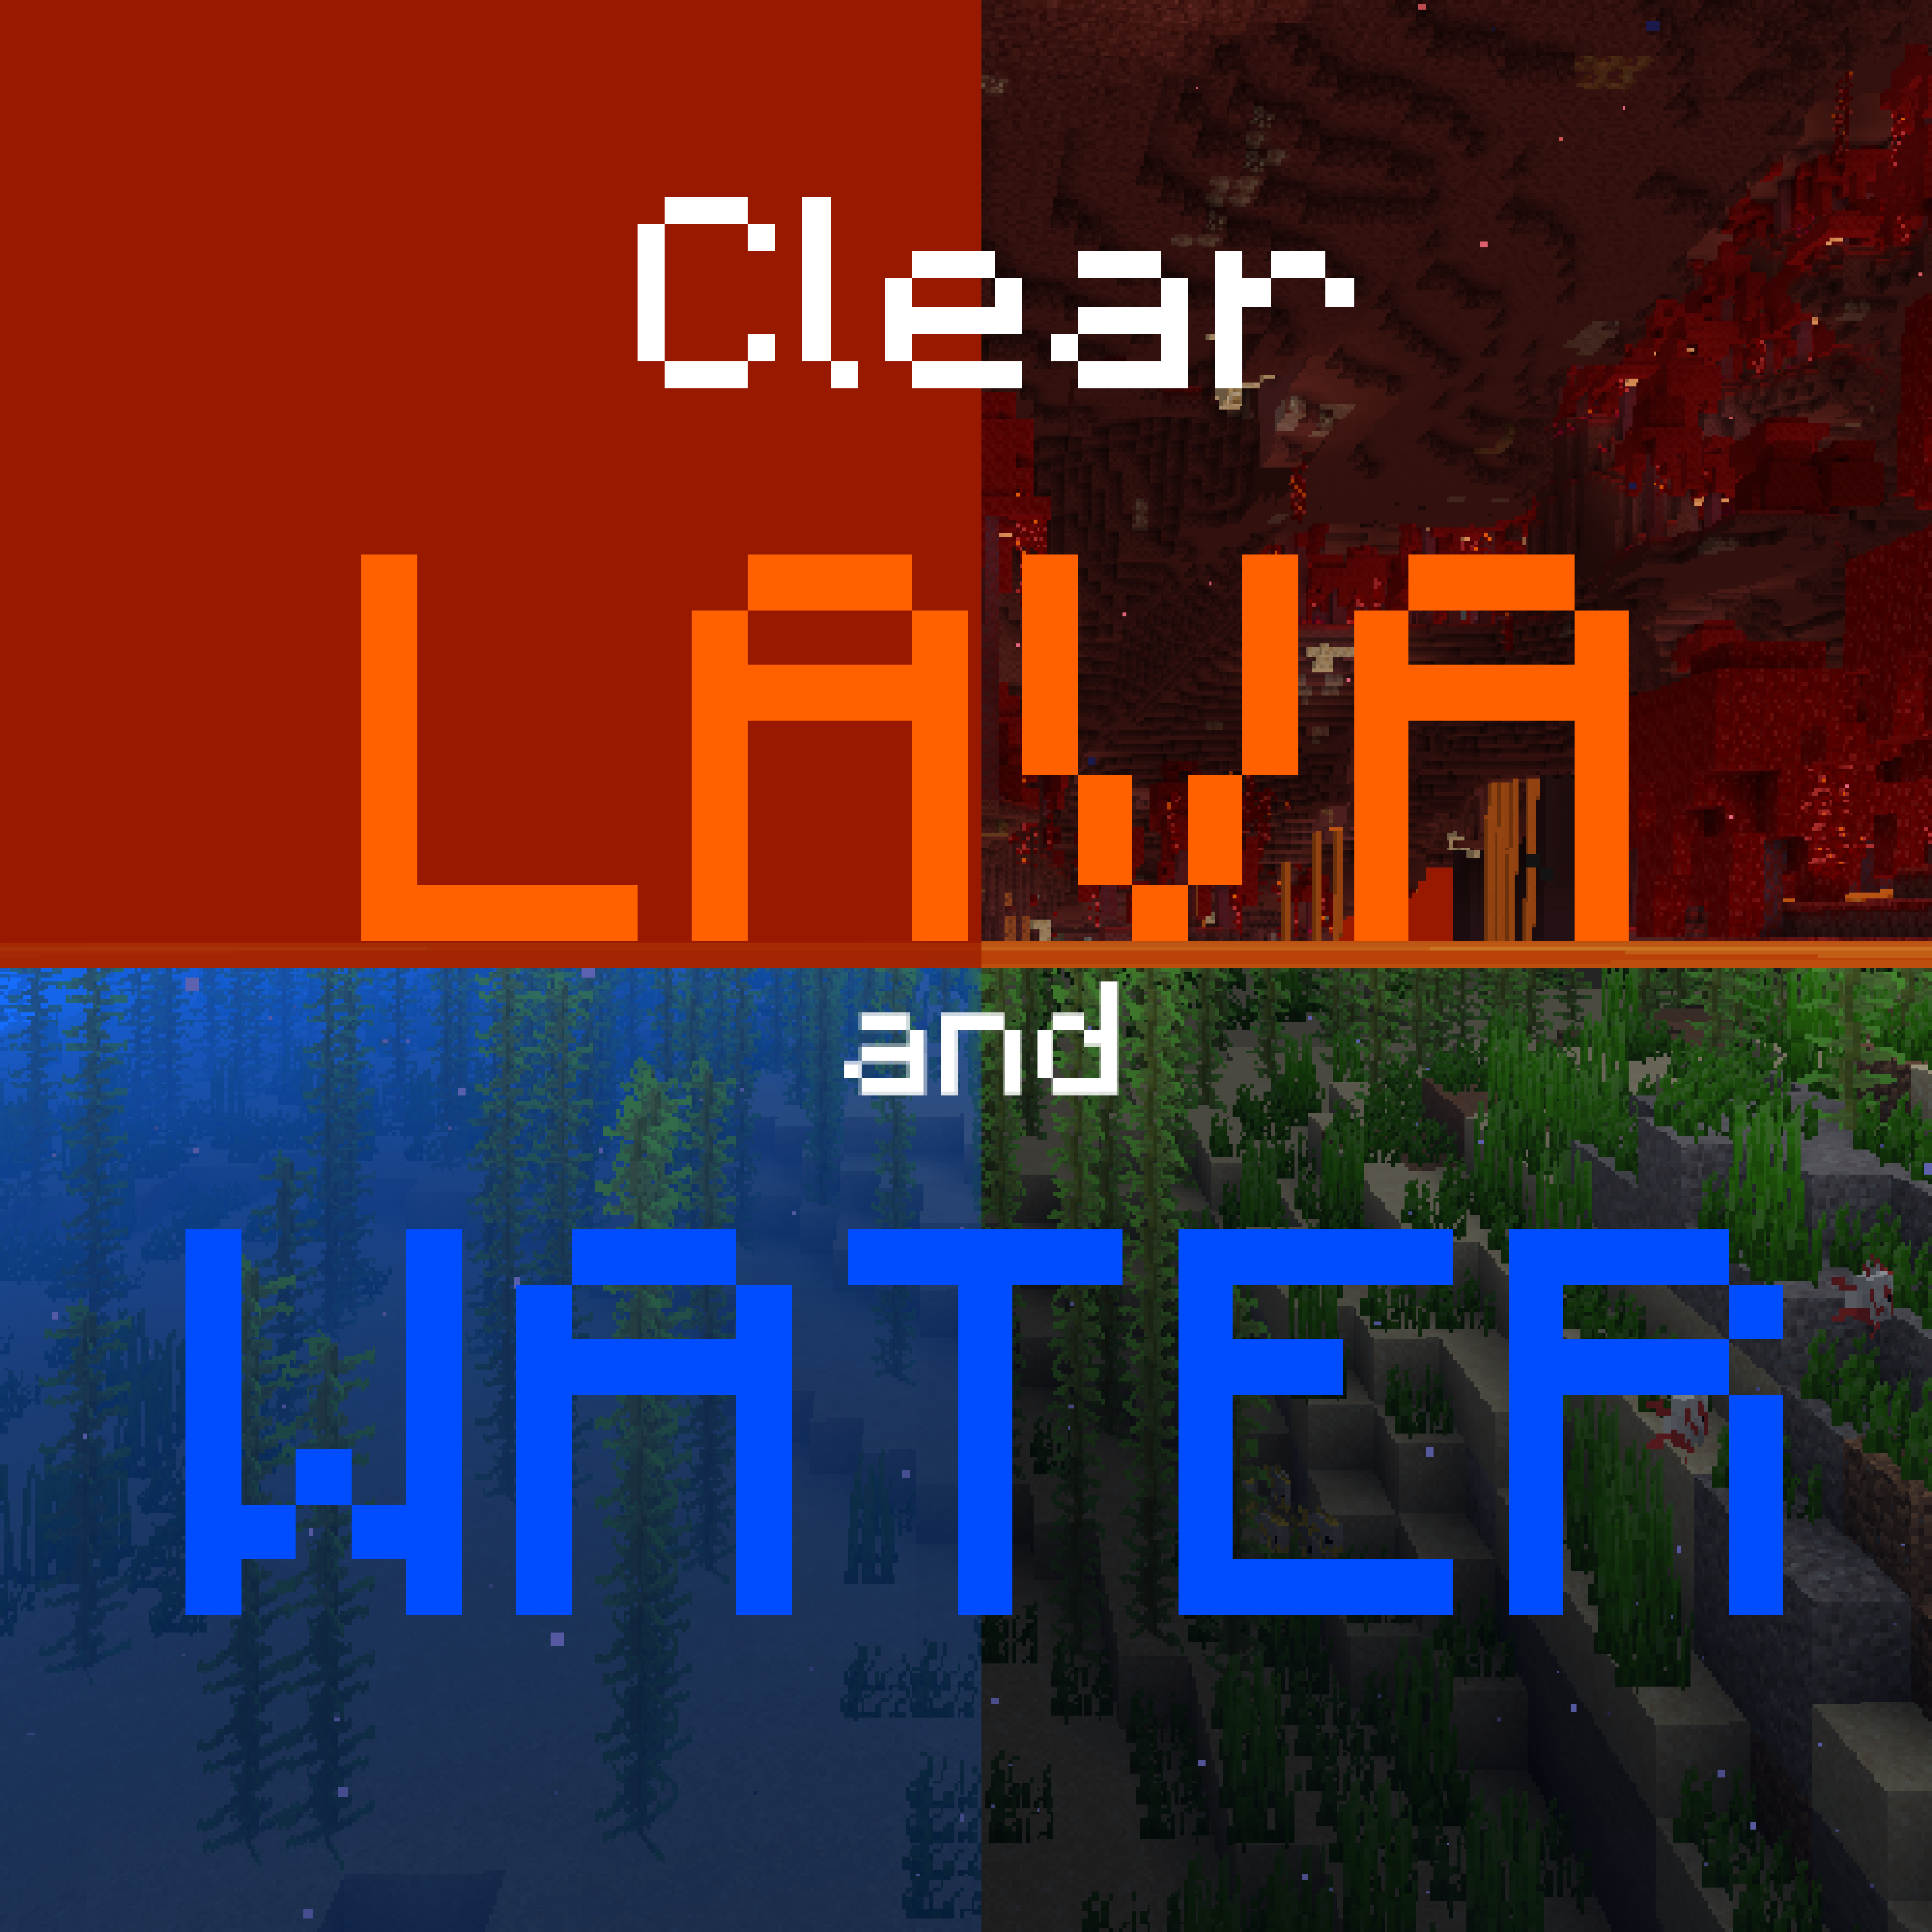 MCPE's Old Water - Minecraft Resource Packs - CurseForge